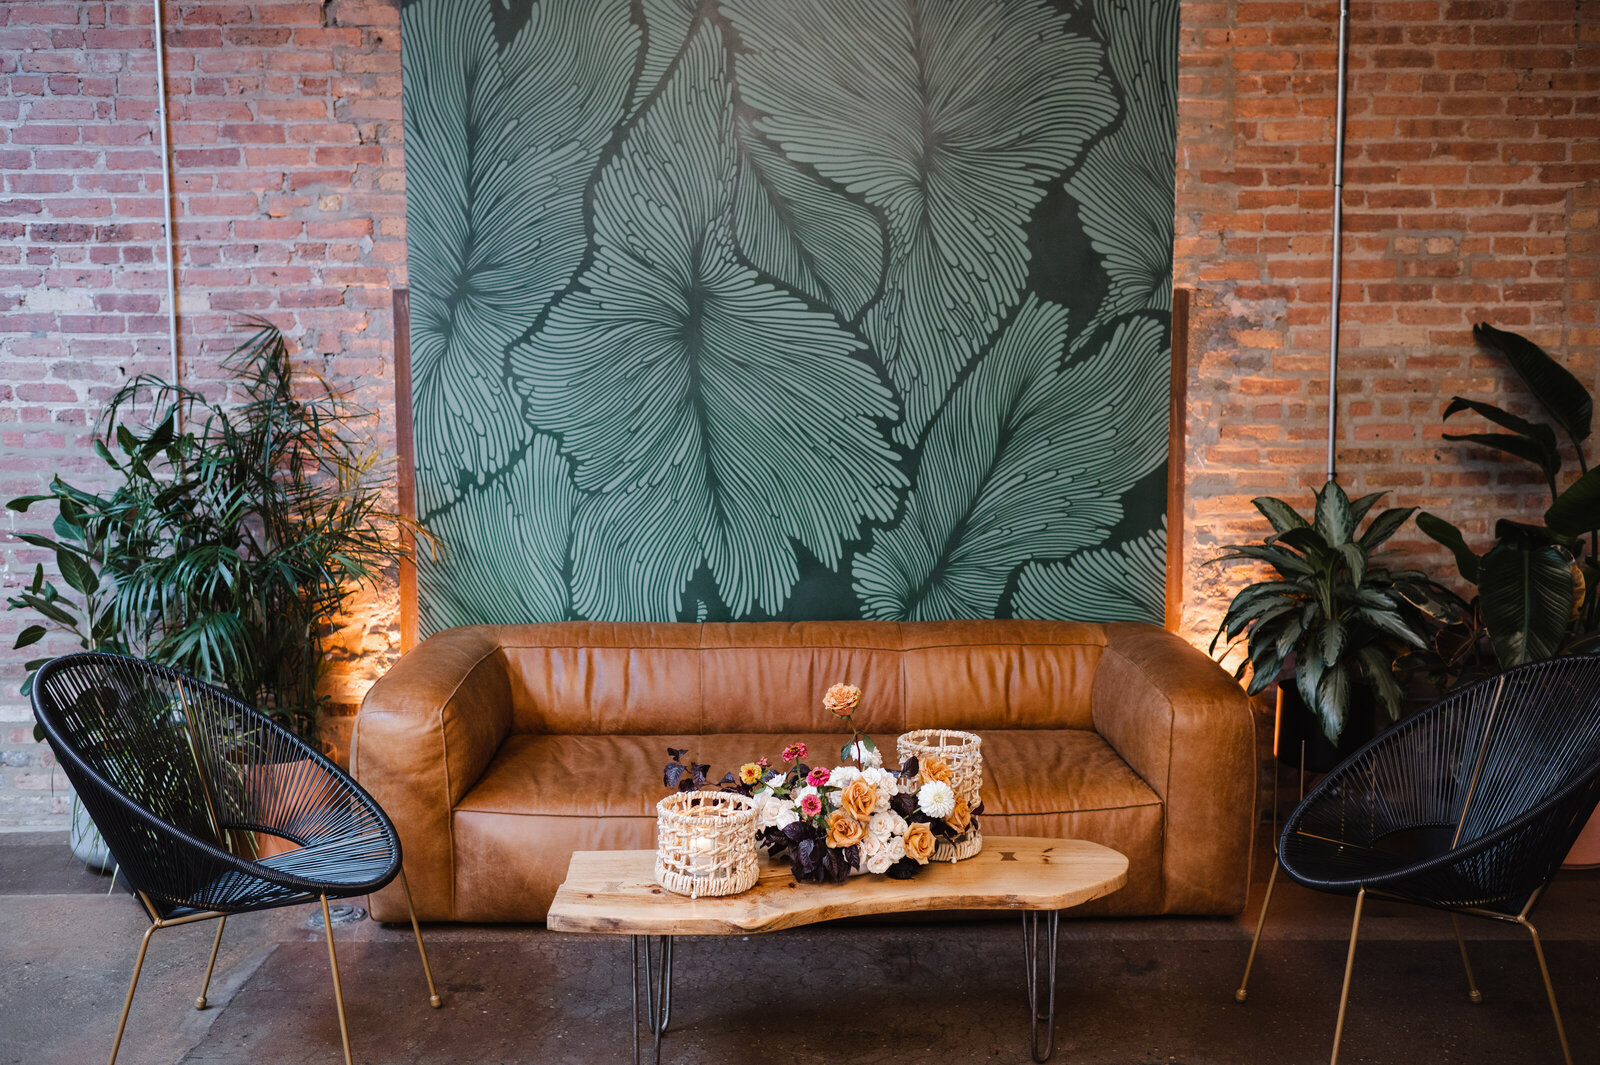 Green Mural and Lounge Furniture Event Space